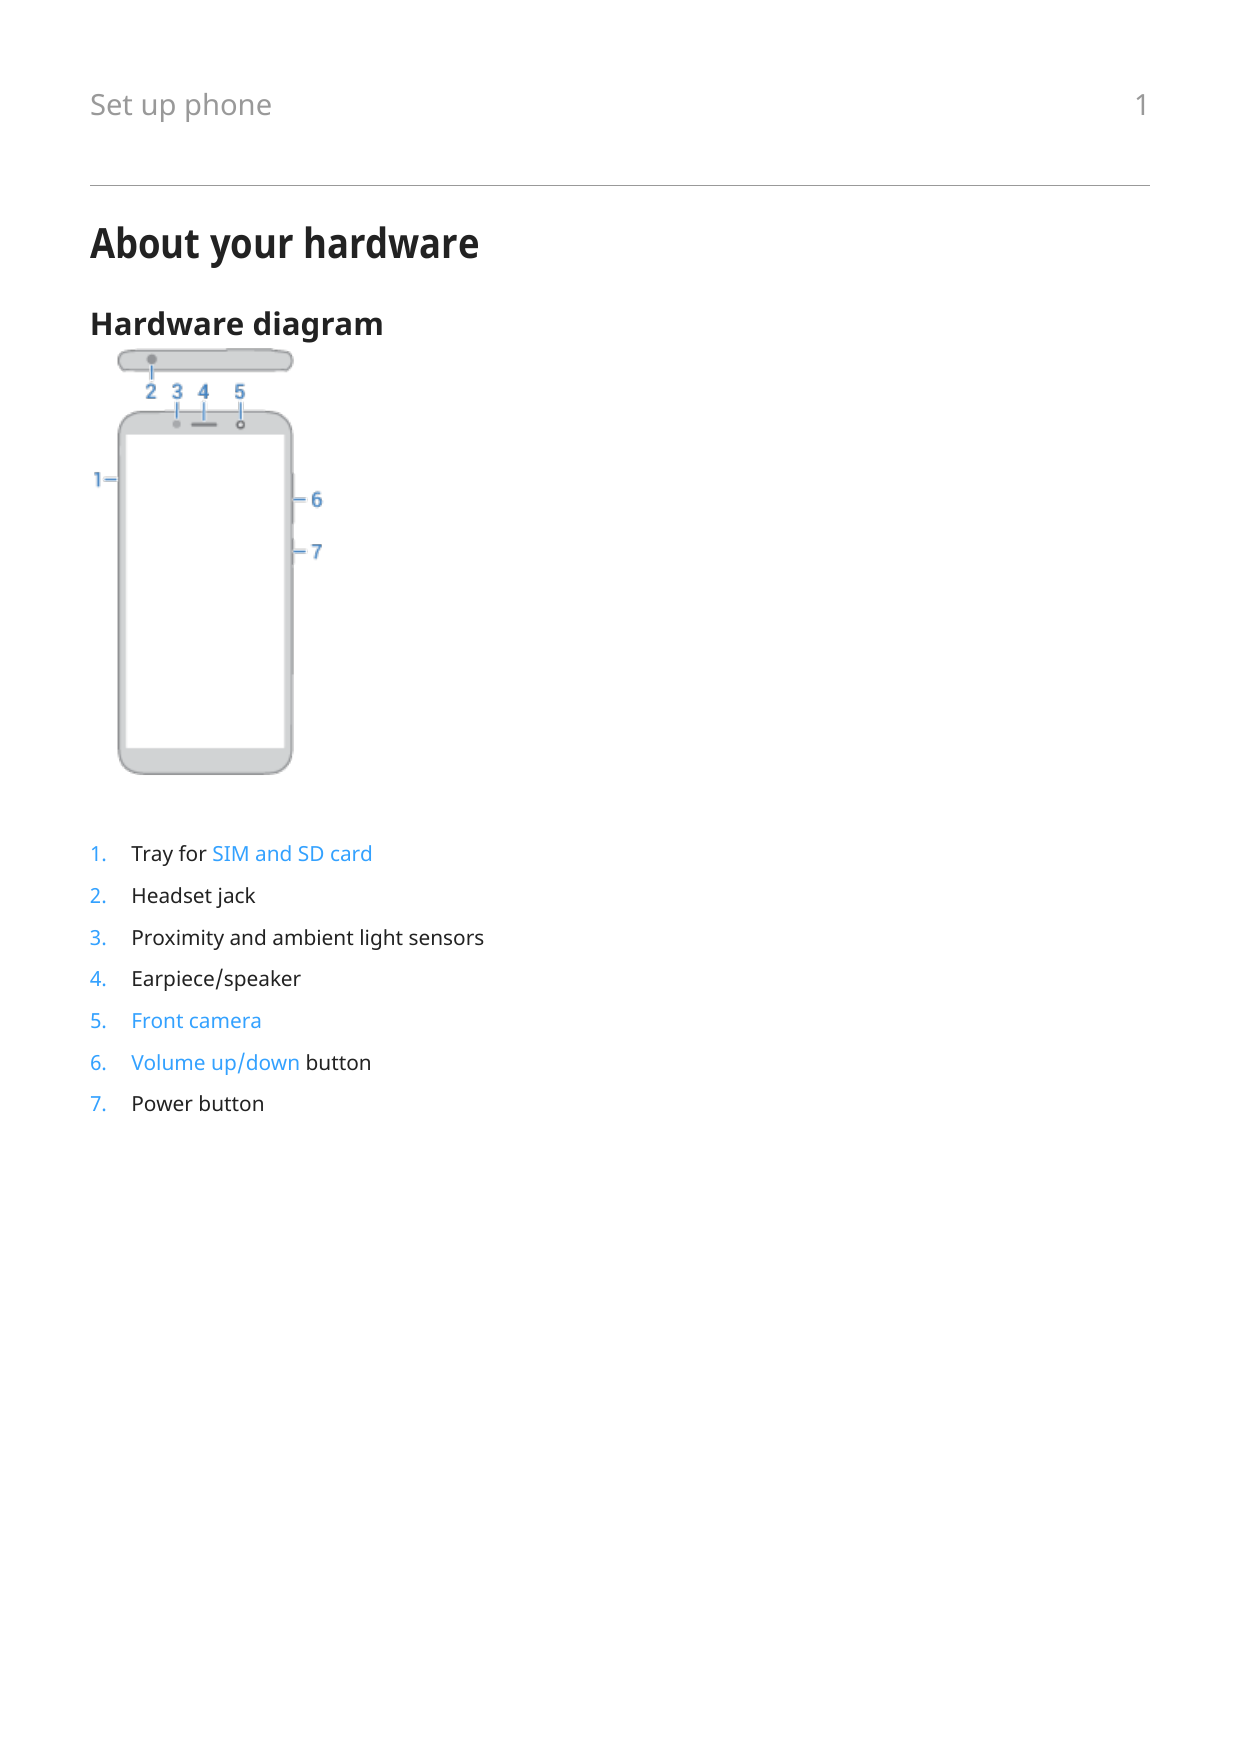 Set up phoneAbout your hardwareHardware diagram1.Tray for SIM and SD card2.Headset jack3.Proximity and ambient light sensors4.Ea